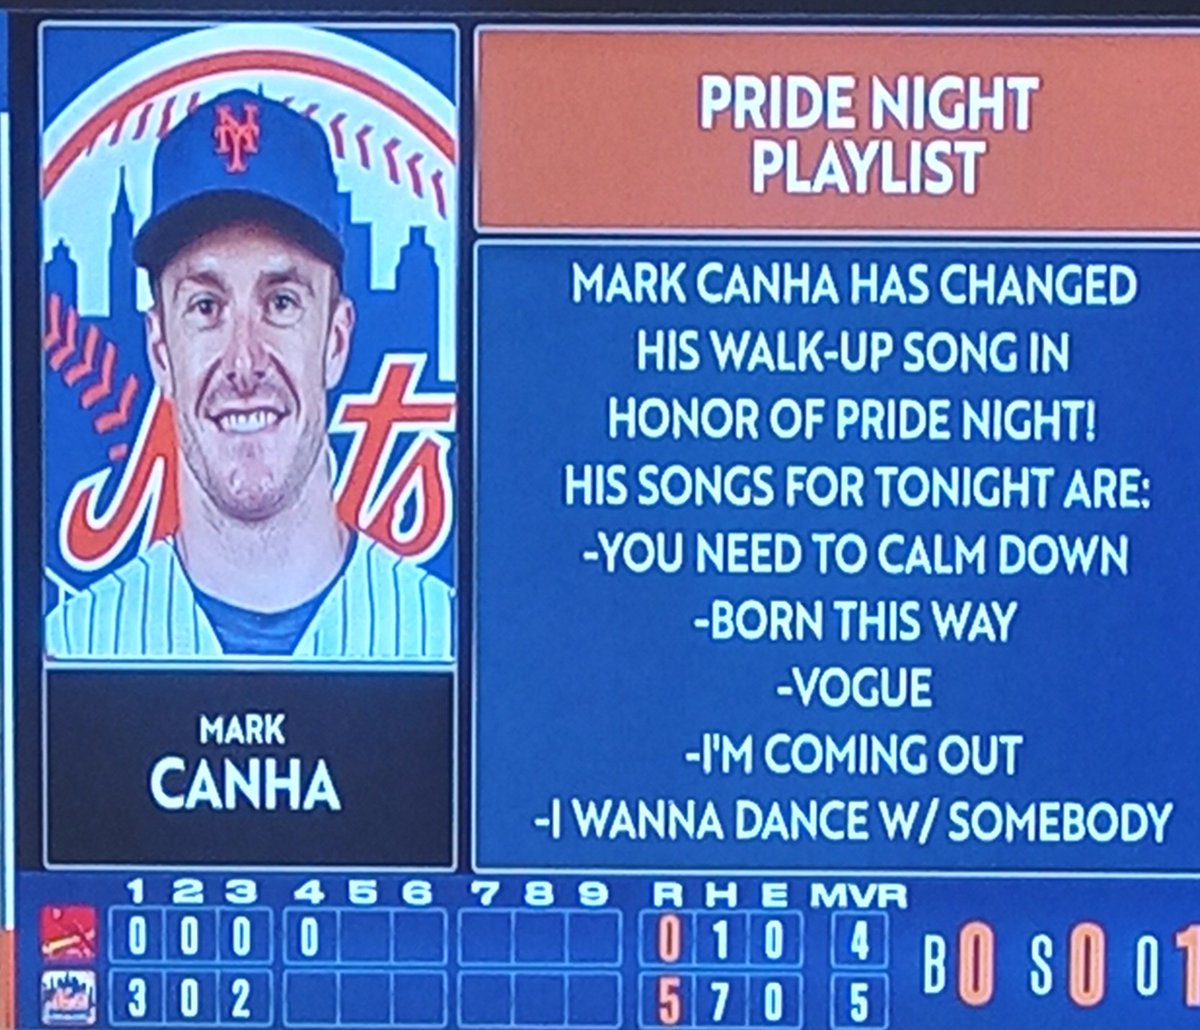 Mark Canha is a Pride Night icon.
#LGM #LFGM